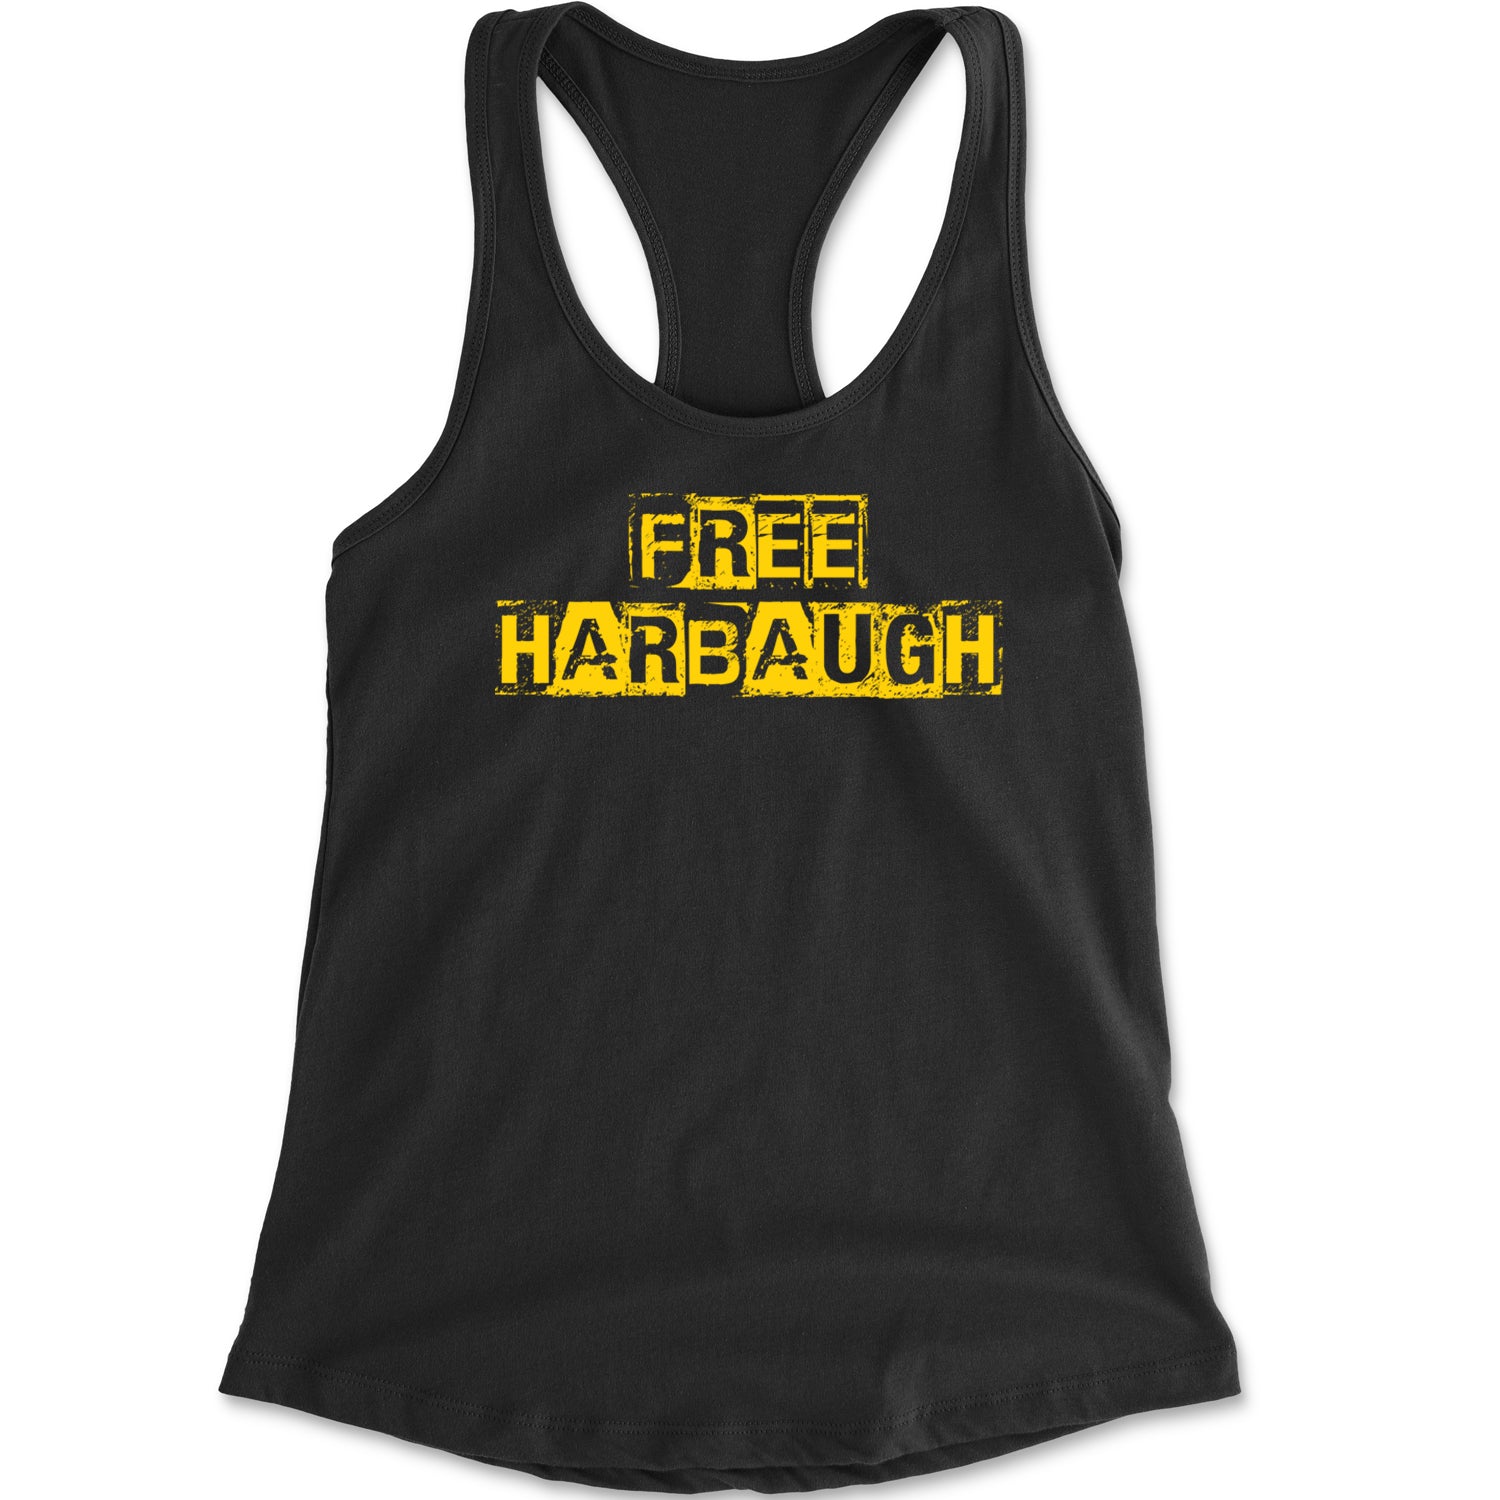 Free Harbaugh Release Our Coach Racerback Tank Top for Women